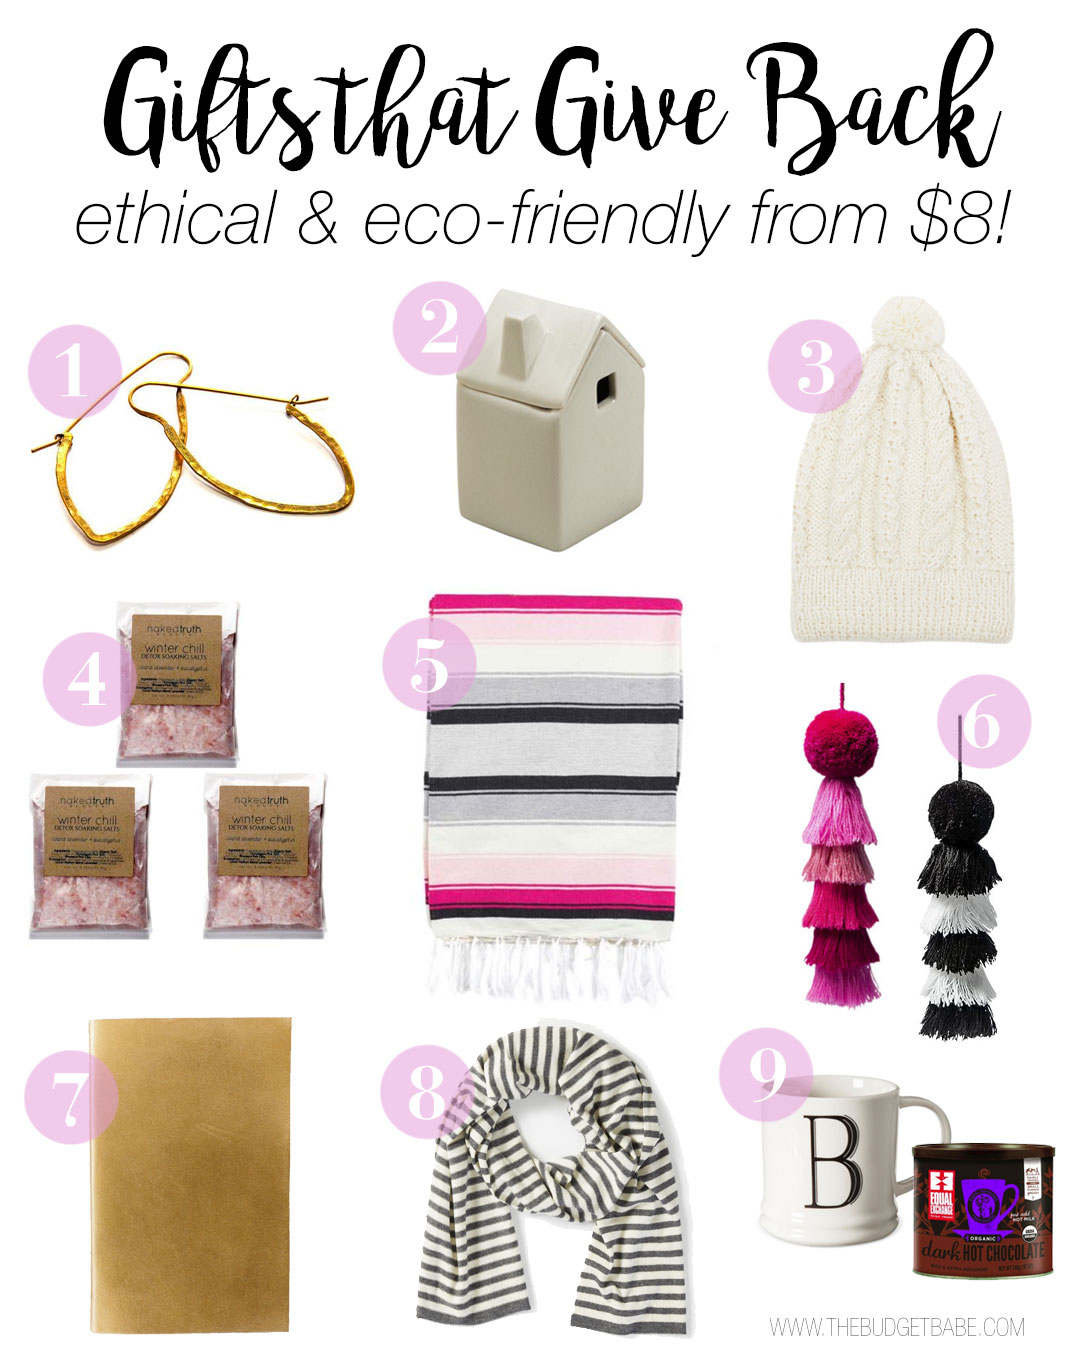 Gifts that Give Back! Shop ethical, organic, fair-trade, eco-friendly gift ideas on a budget